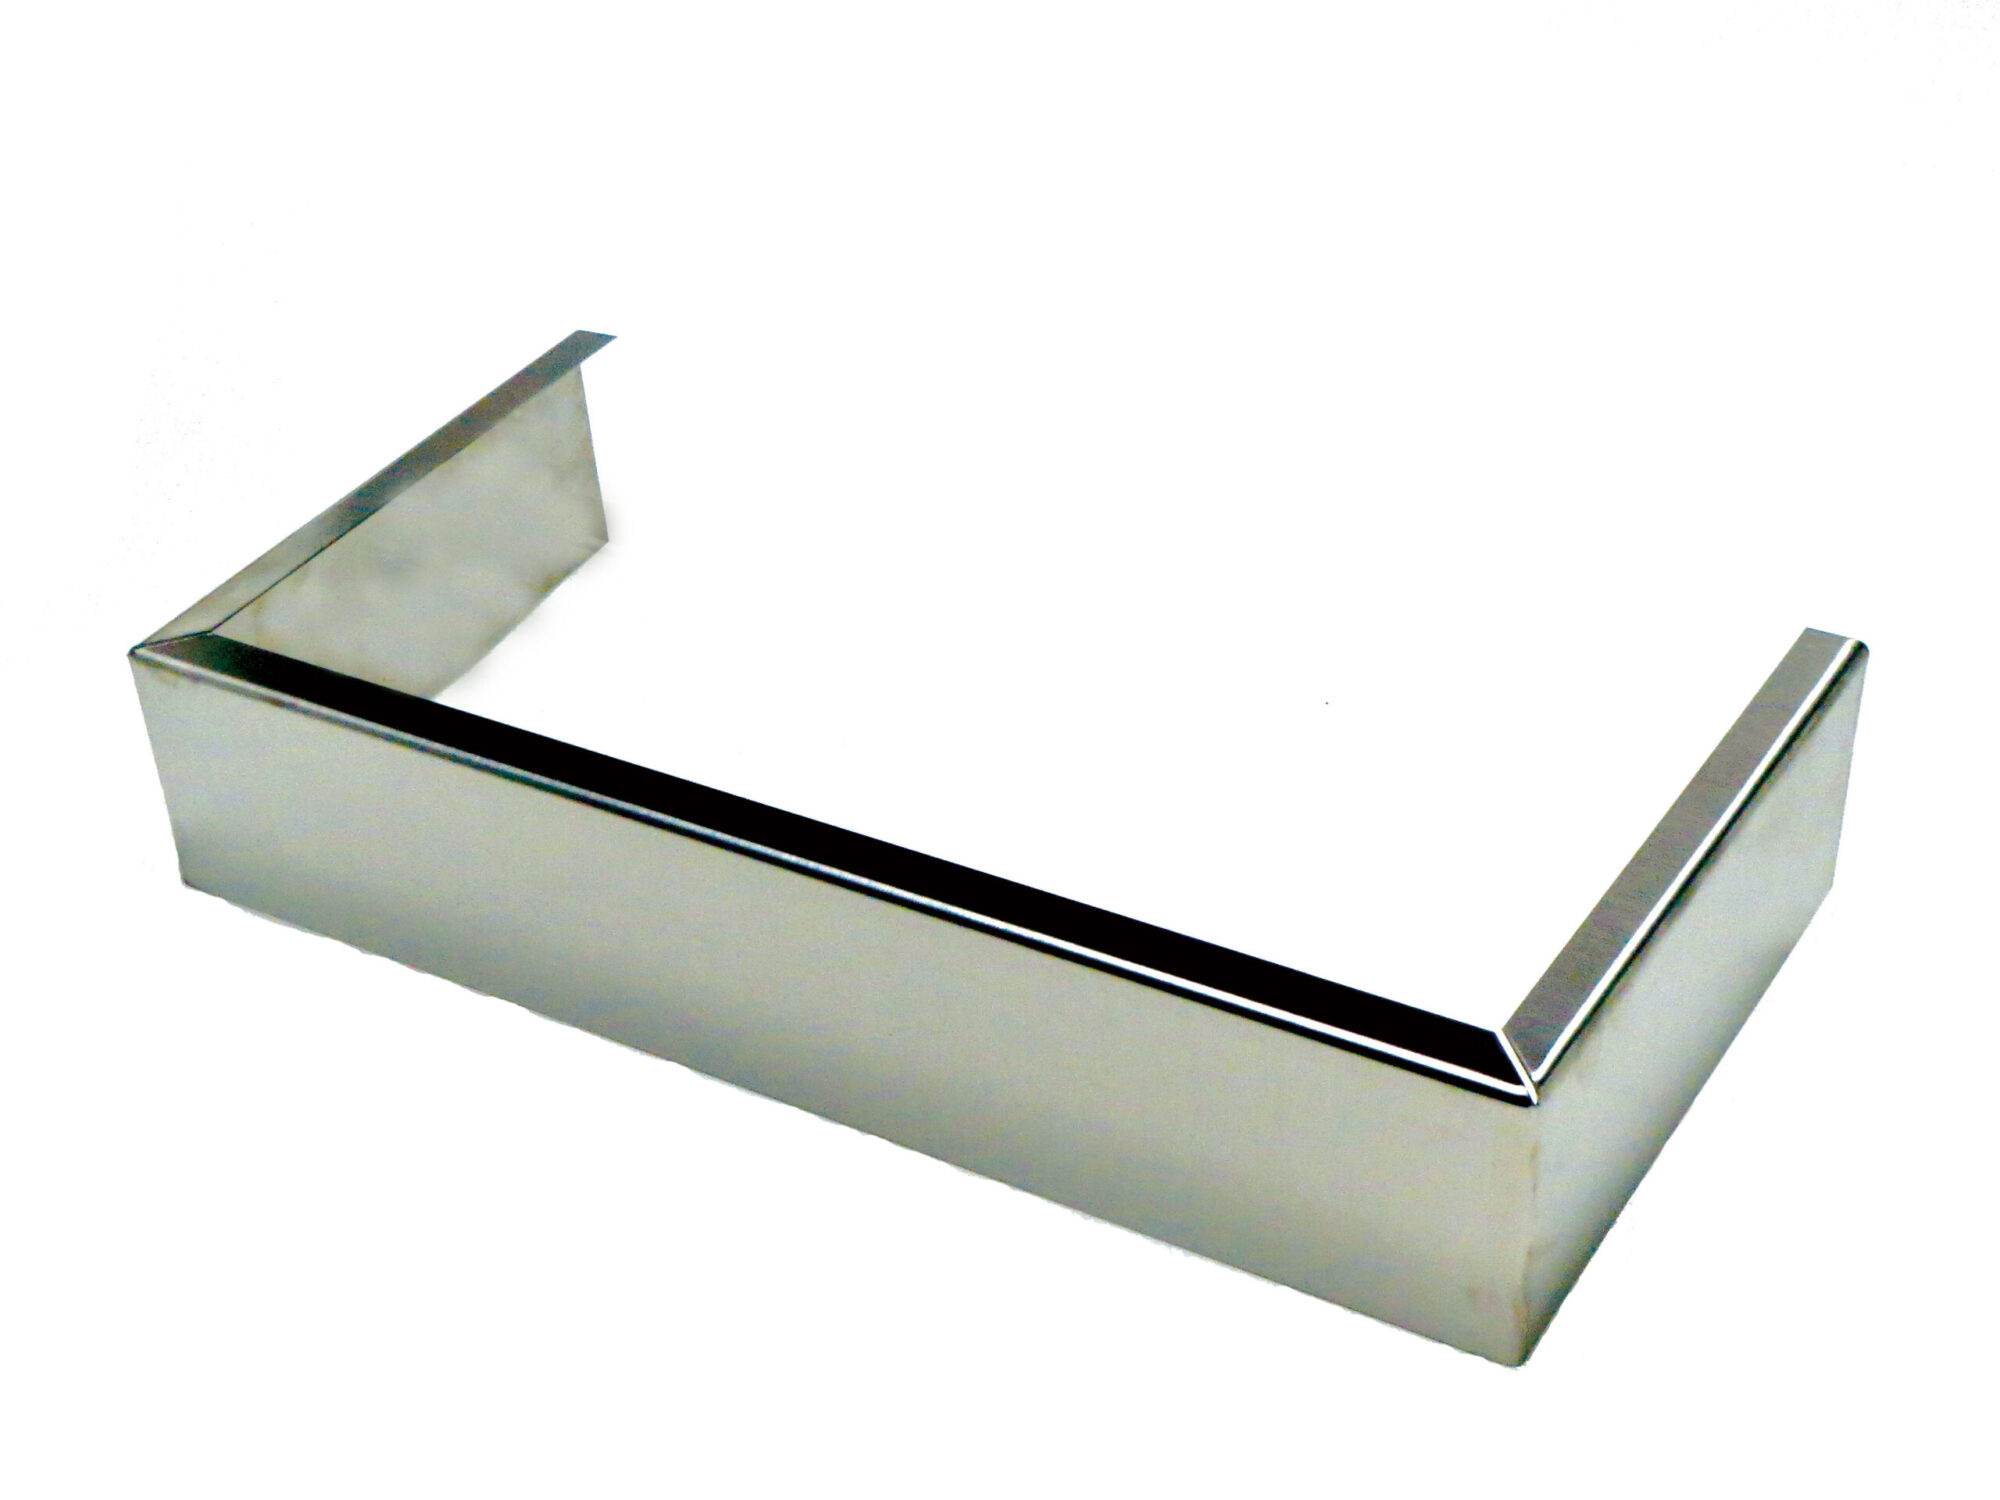 SK12 Drain Skirt For Wall Mount Trays - Fits 8" Wide Tray